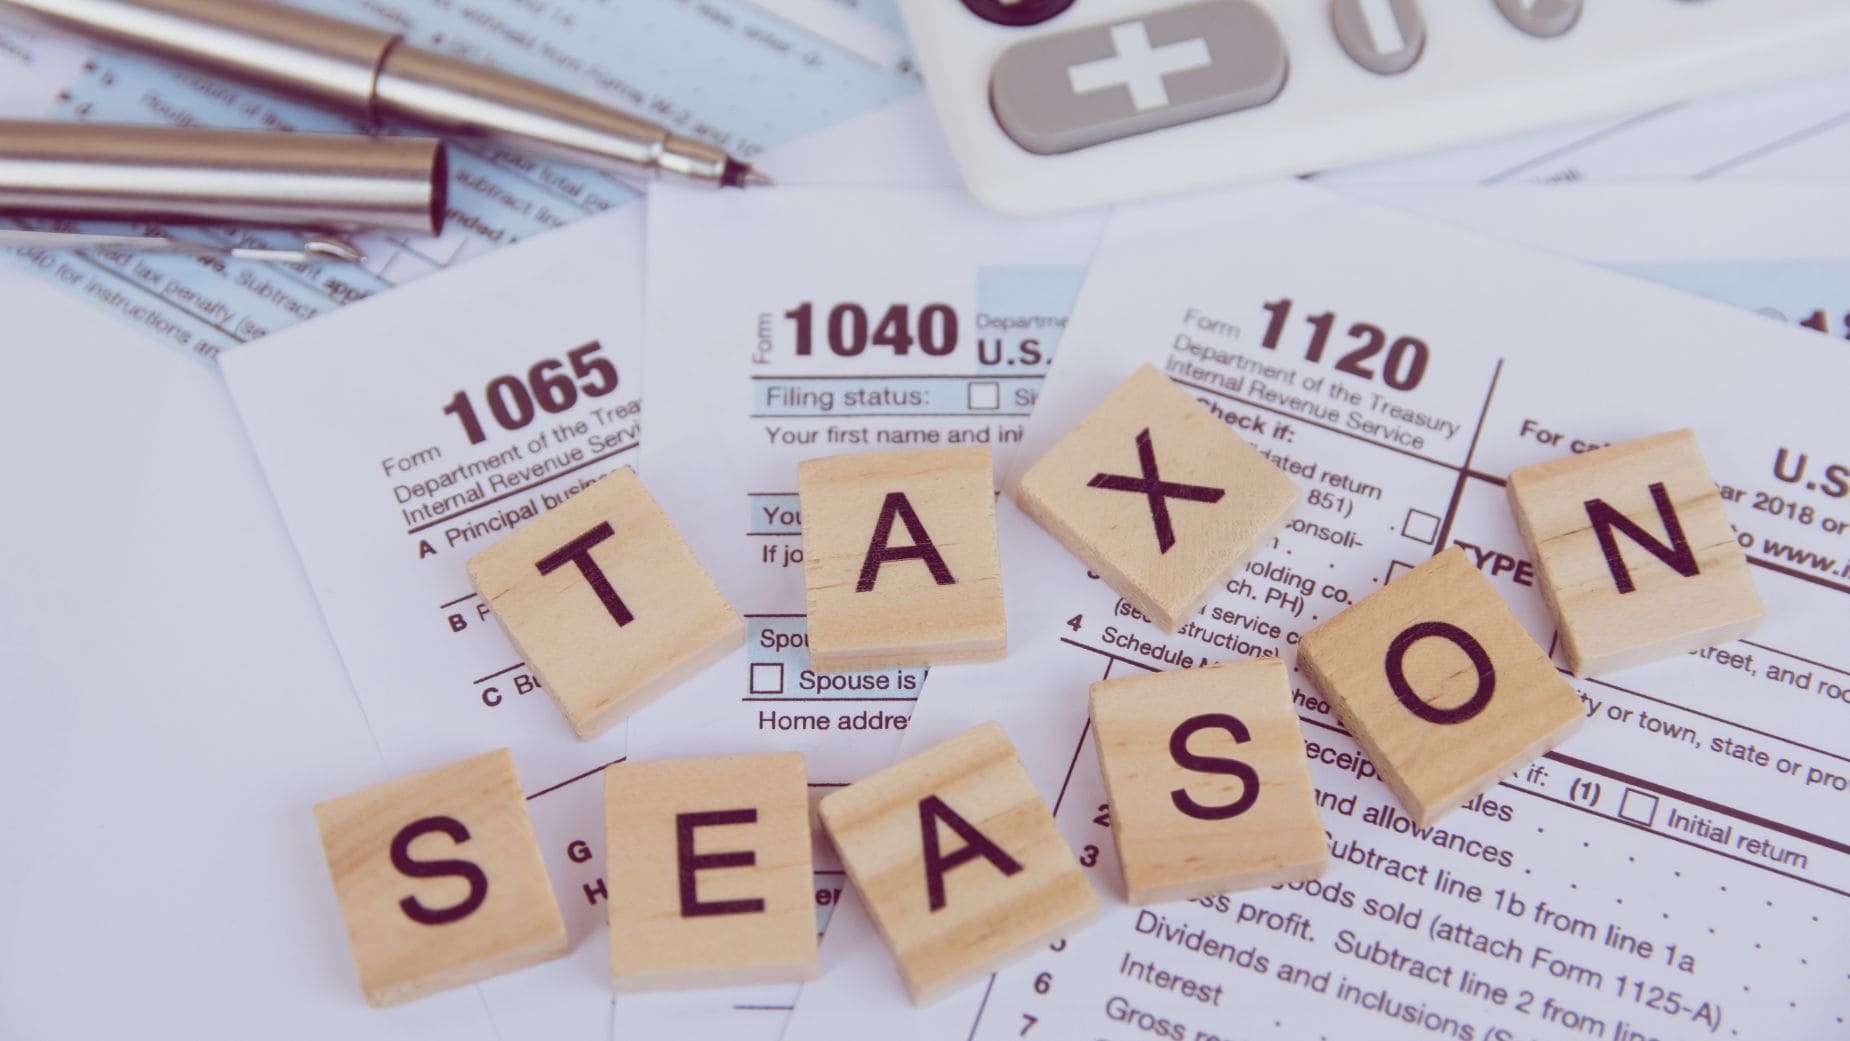 When will the IRS close the Tax Season? Every state is different